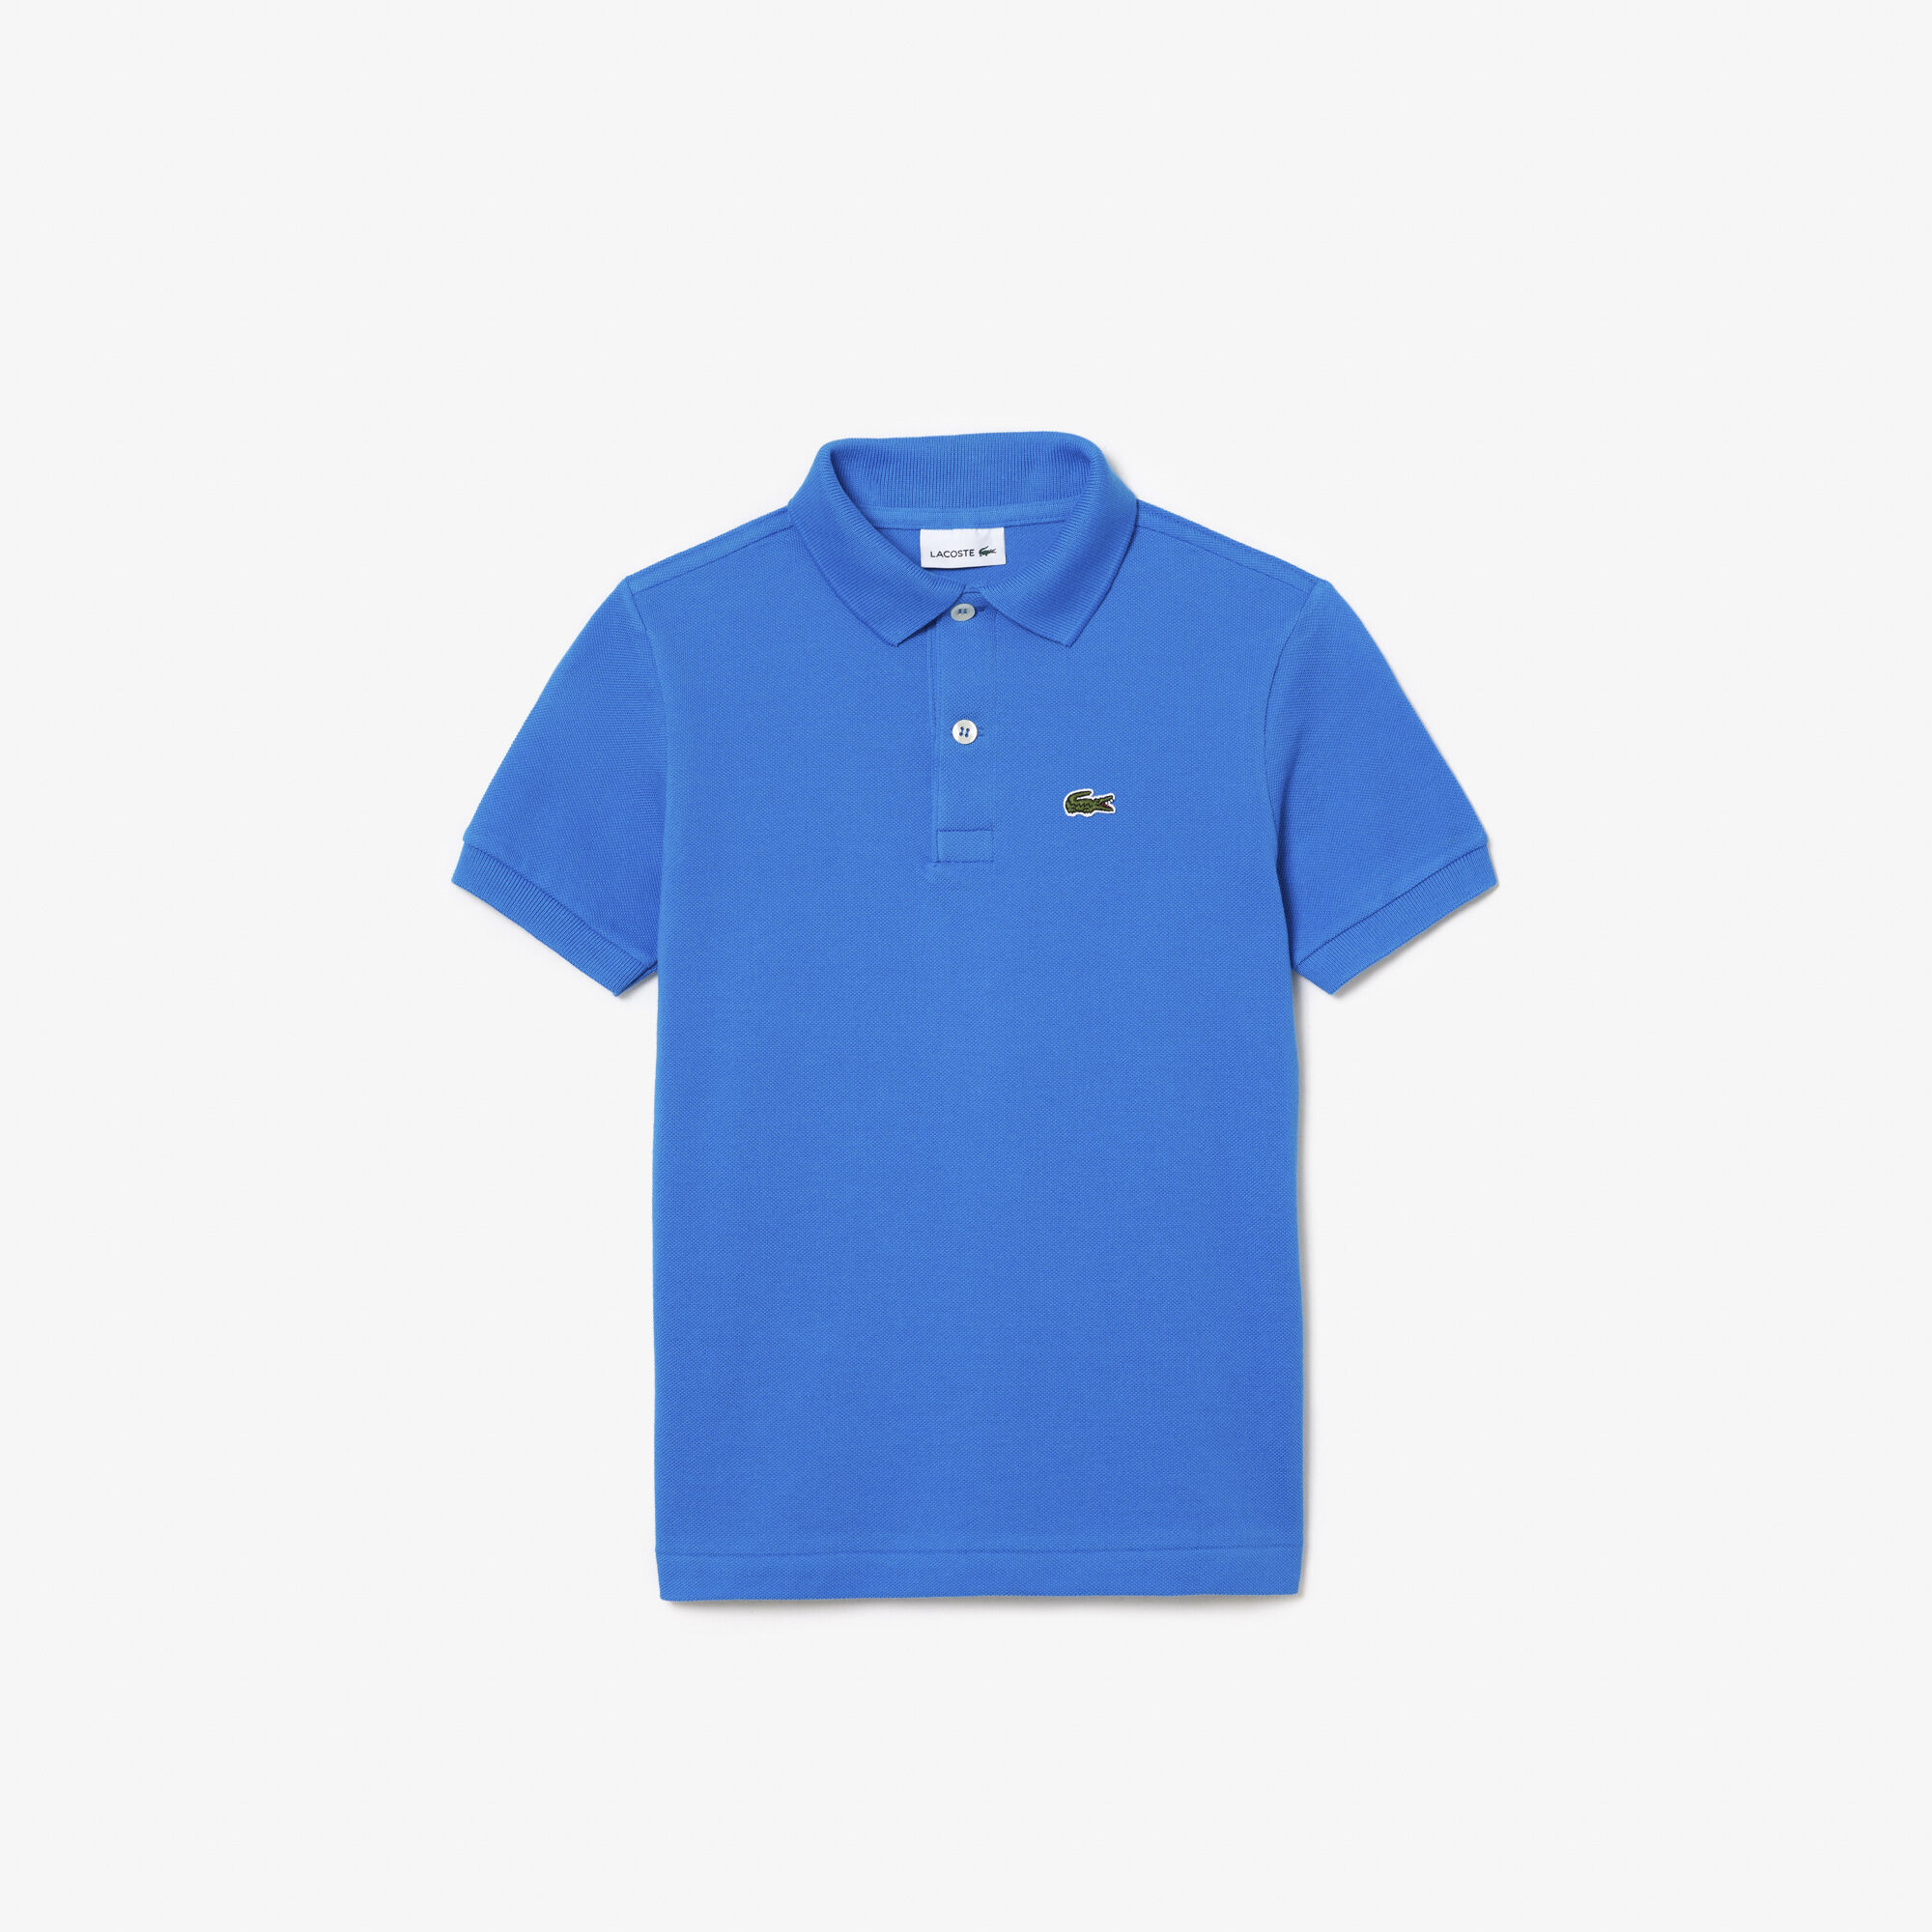 Find amazing products in Clothing' today | Lacoste EG